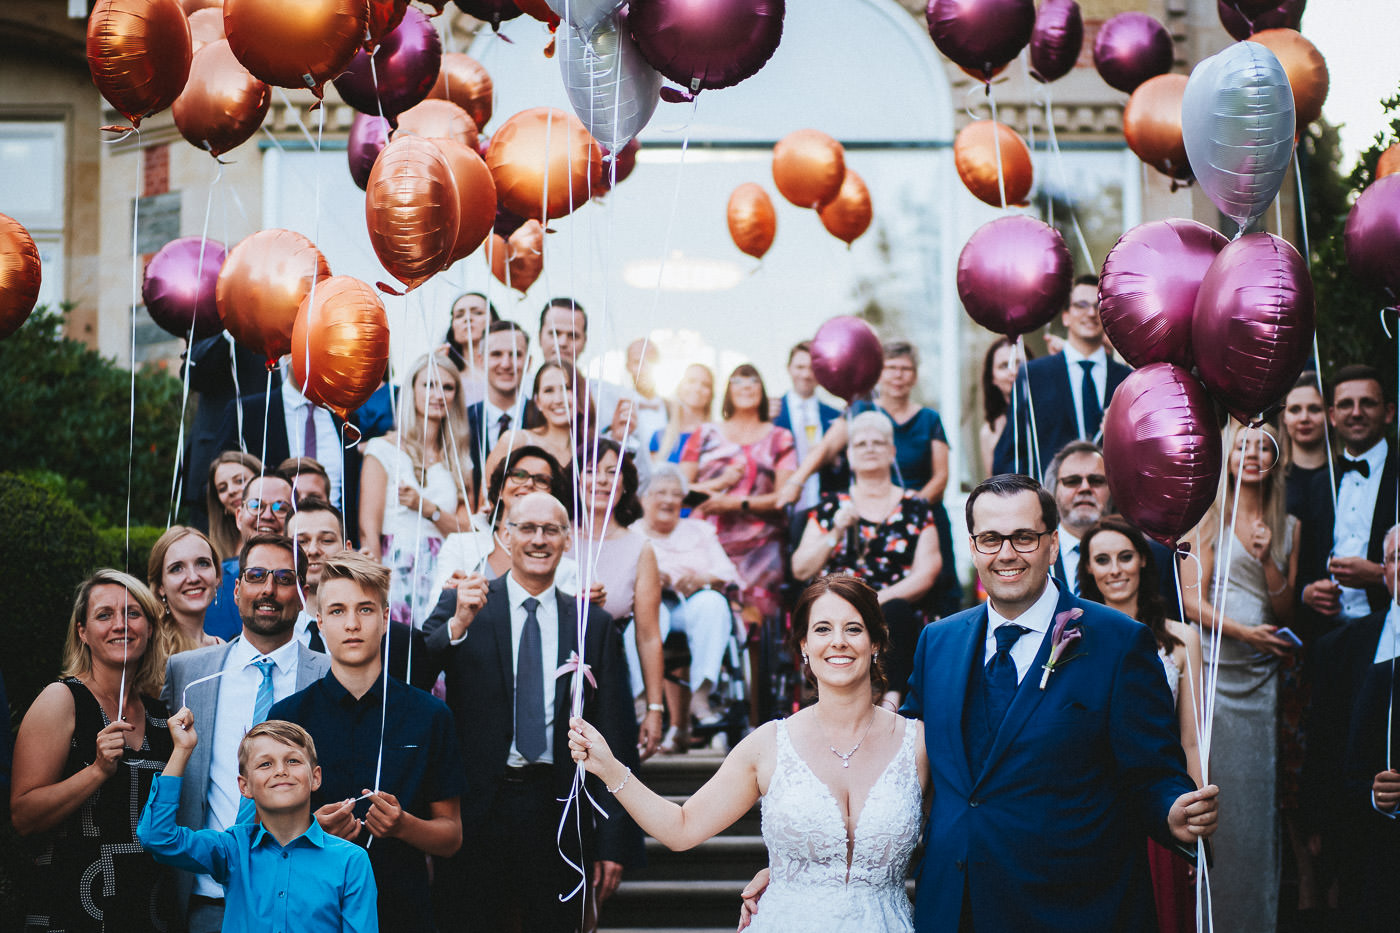 Group photo of the wedding party with the bridal couple and balloons in front of the Villa Rothschild - wedding photographer Taunus Brautrausch